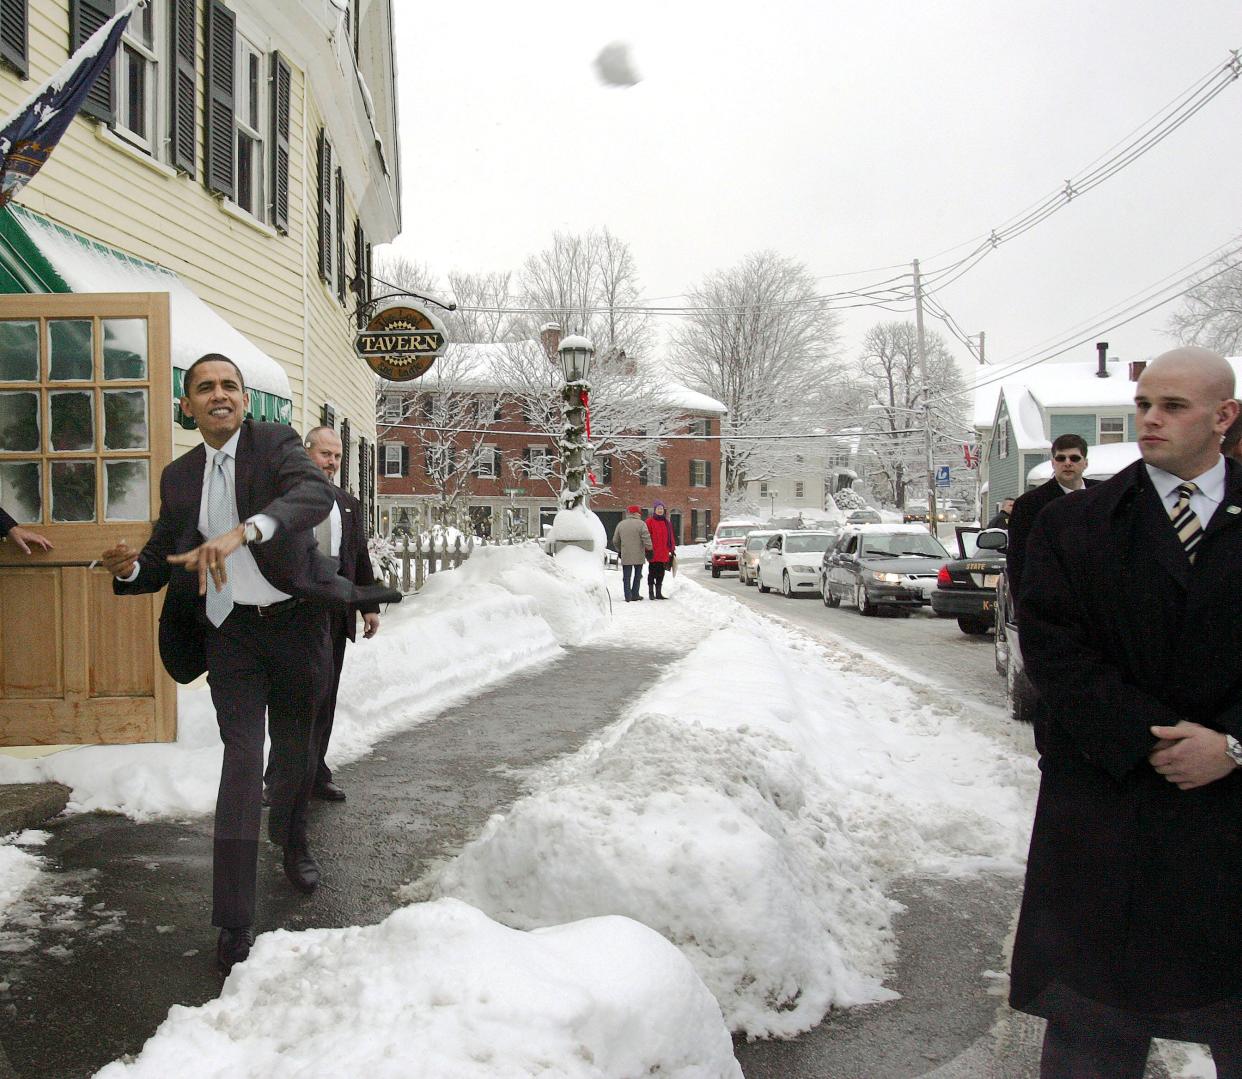 Democratic presidential hopeful, U.S. Sen Barack Obama, D-Ill., throws a snowball at Robert Gibbs his communications director following a round table discussion campaign stop in Exeter, N.H., Thursday, Dec. 20, 2007.